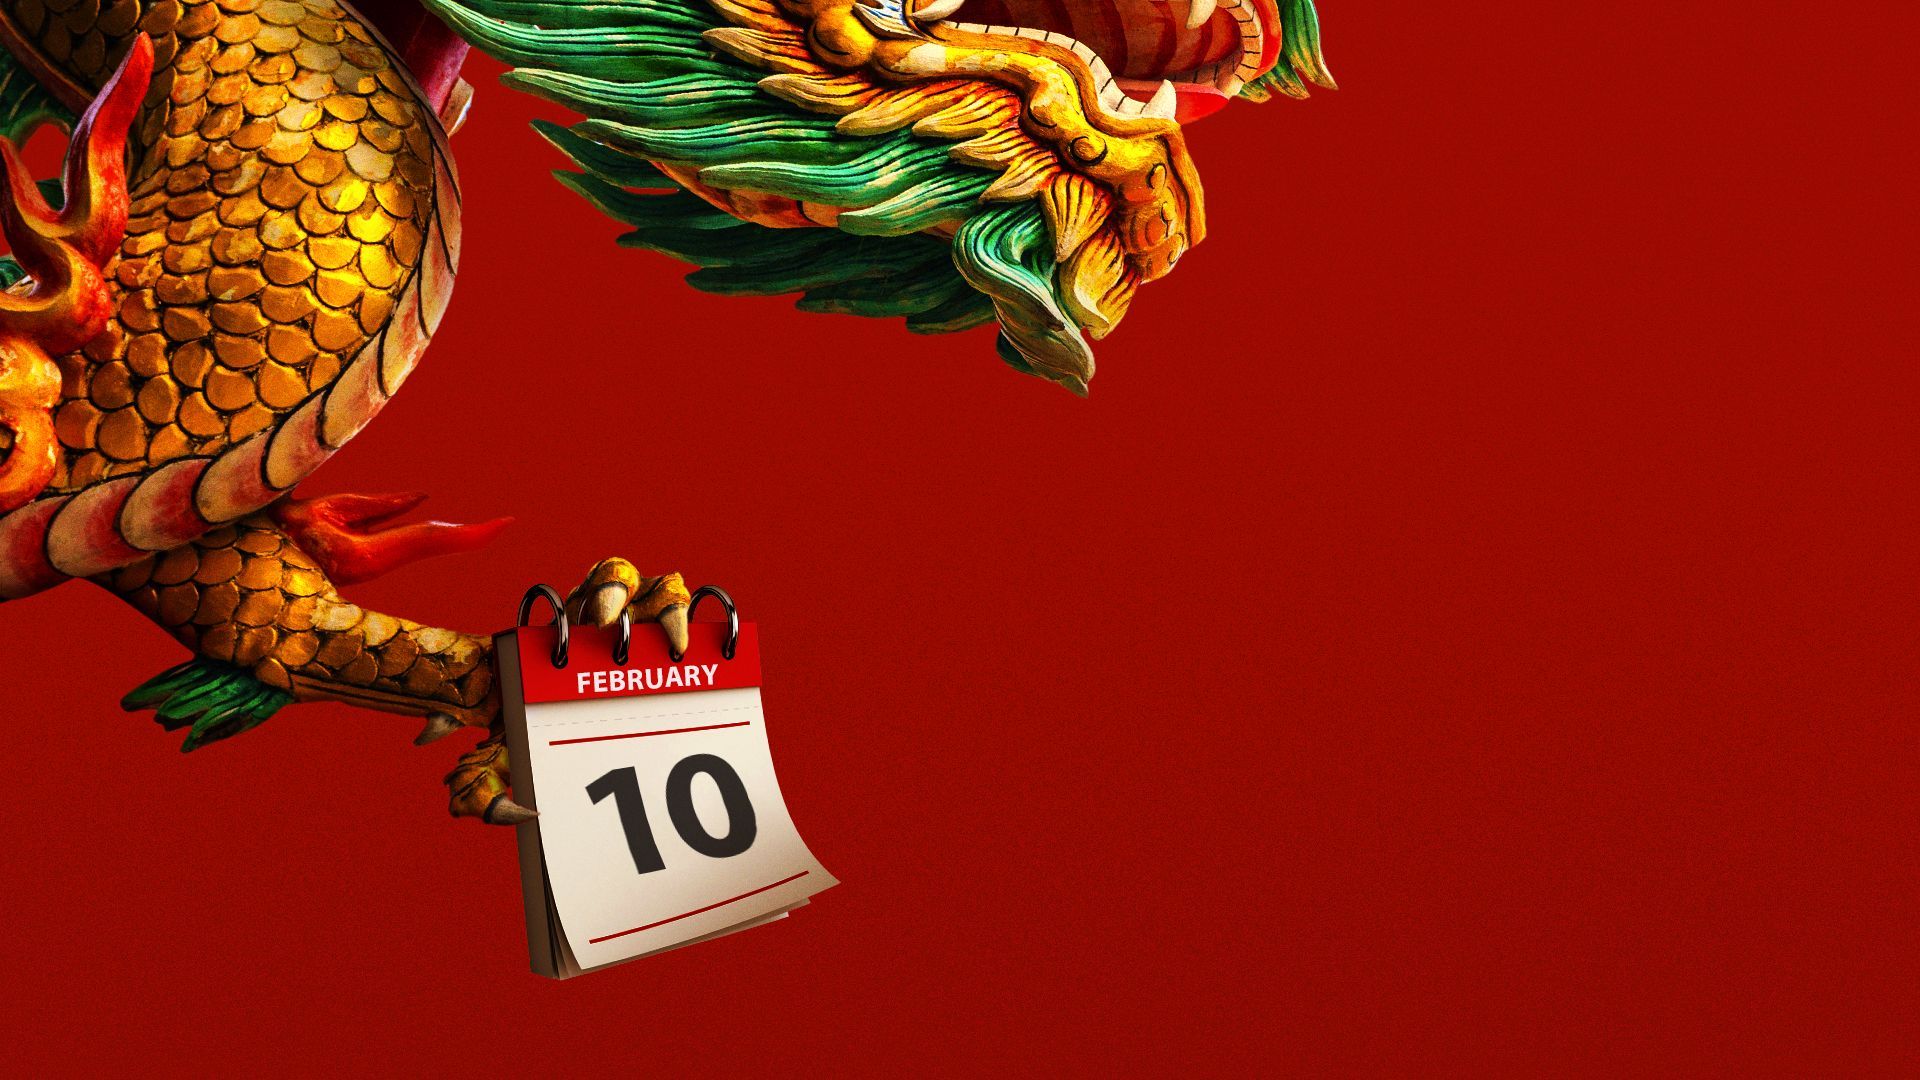 Illustration of a dragon holding a calendar with the date February 10th on it.